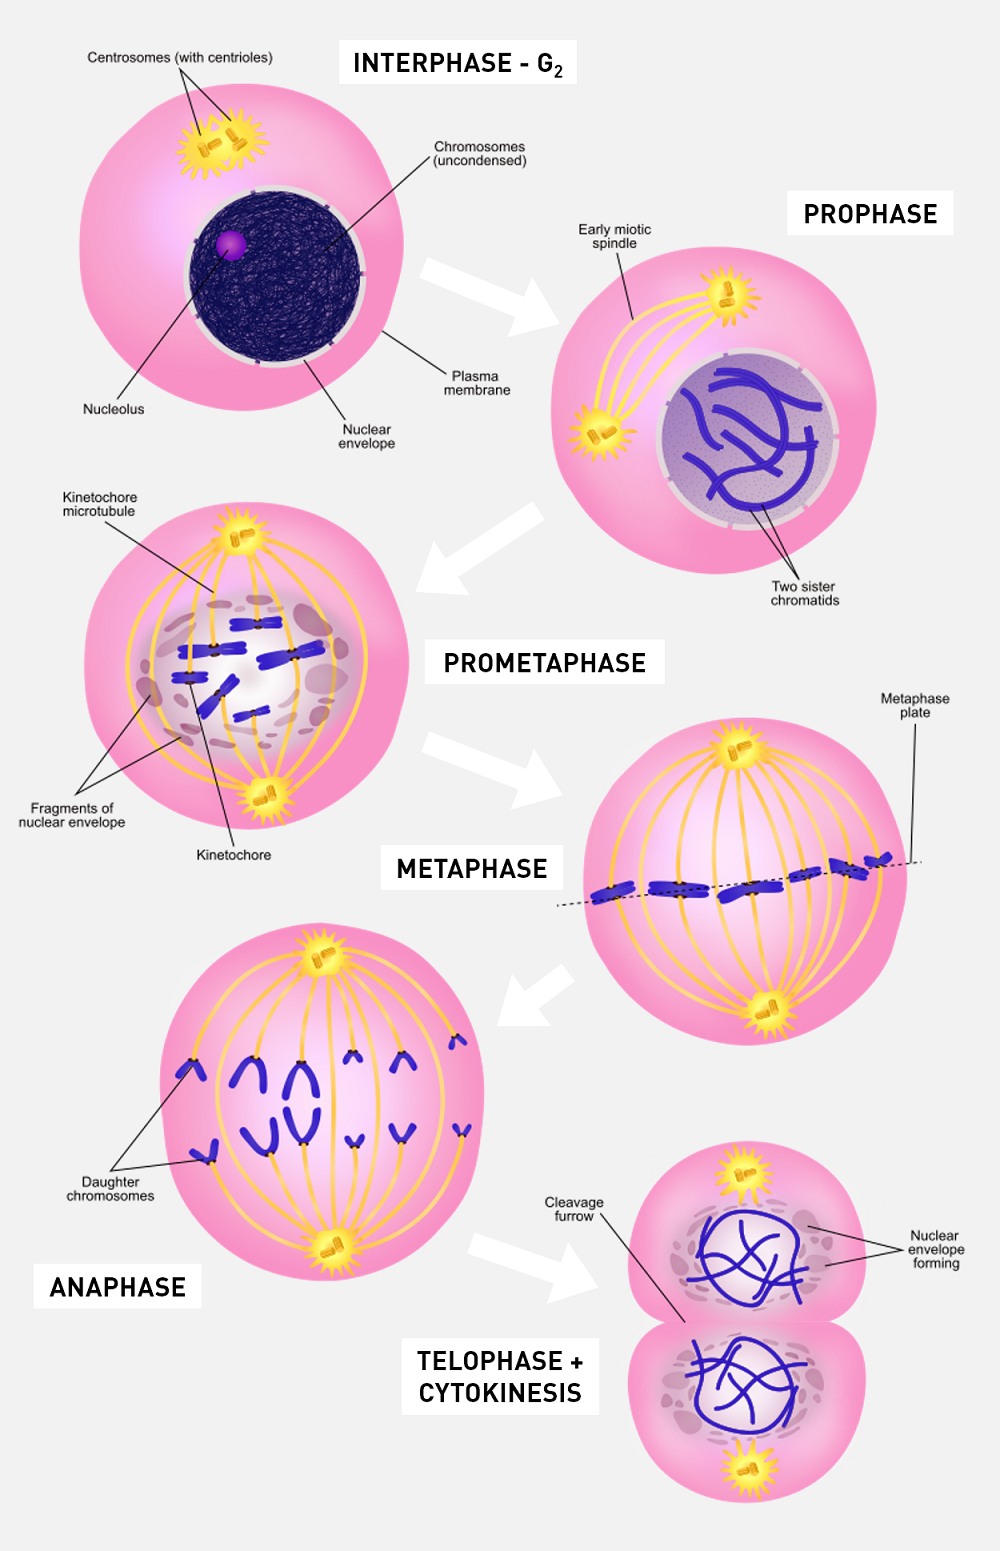 The Mitosis stages of the cell cycle. Adapted from a graphic  by <a href="https://commons.wikimedia.org/wiki/User:Ali_Zifan">Ali Zifan</a> / <a href="https://creativecommons.org/licenses/by/4.0/legalcode">CC BY-SA 4.0</a>